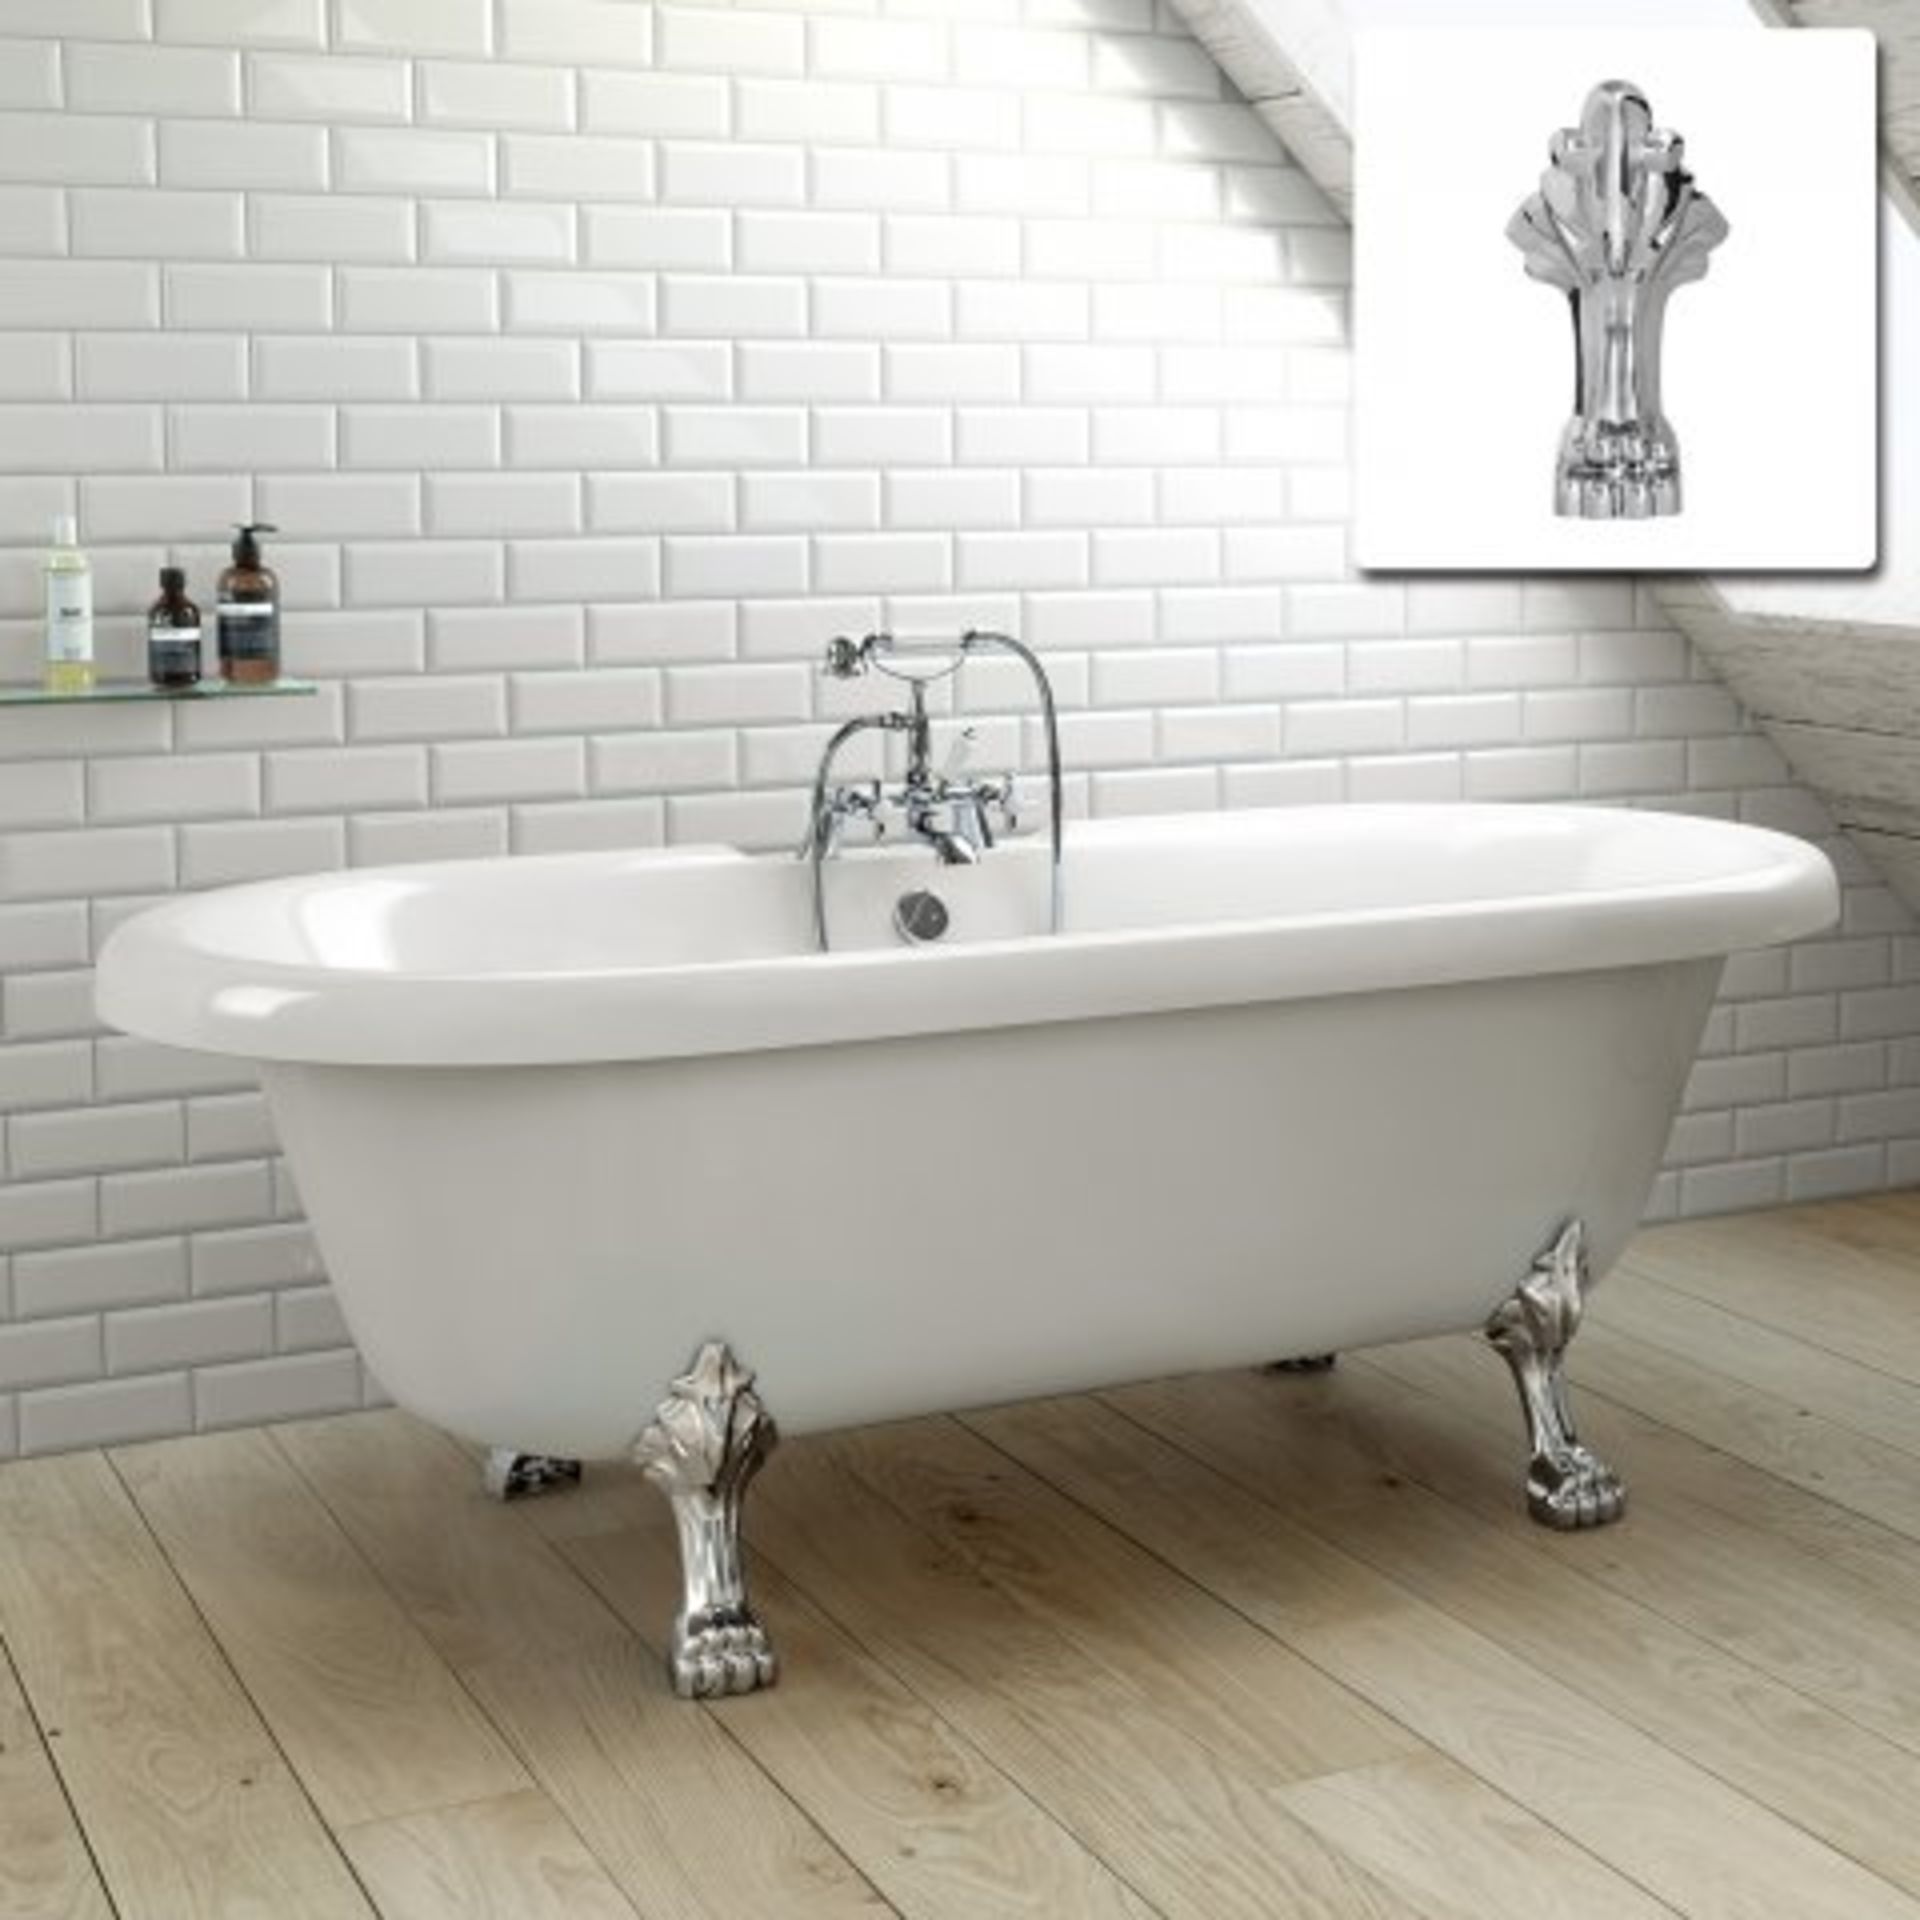 (O4) 1700mm Victoria Traditional Roll Top Bath - Dragon Feet - Large. RRP £799.99. This stunning